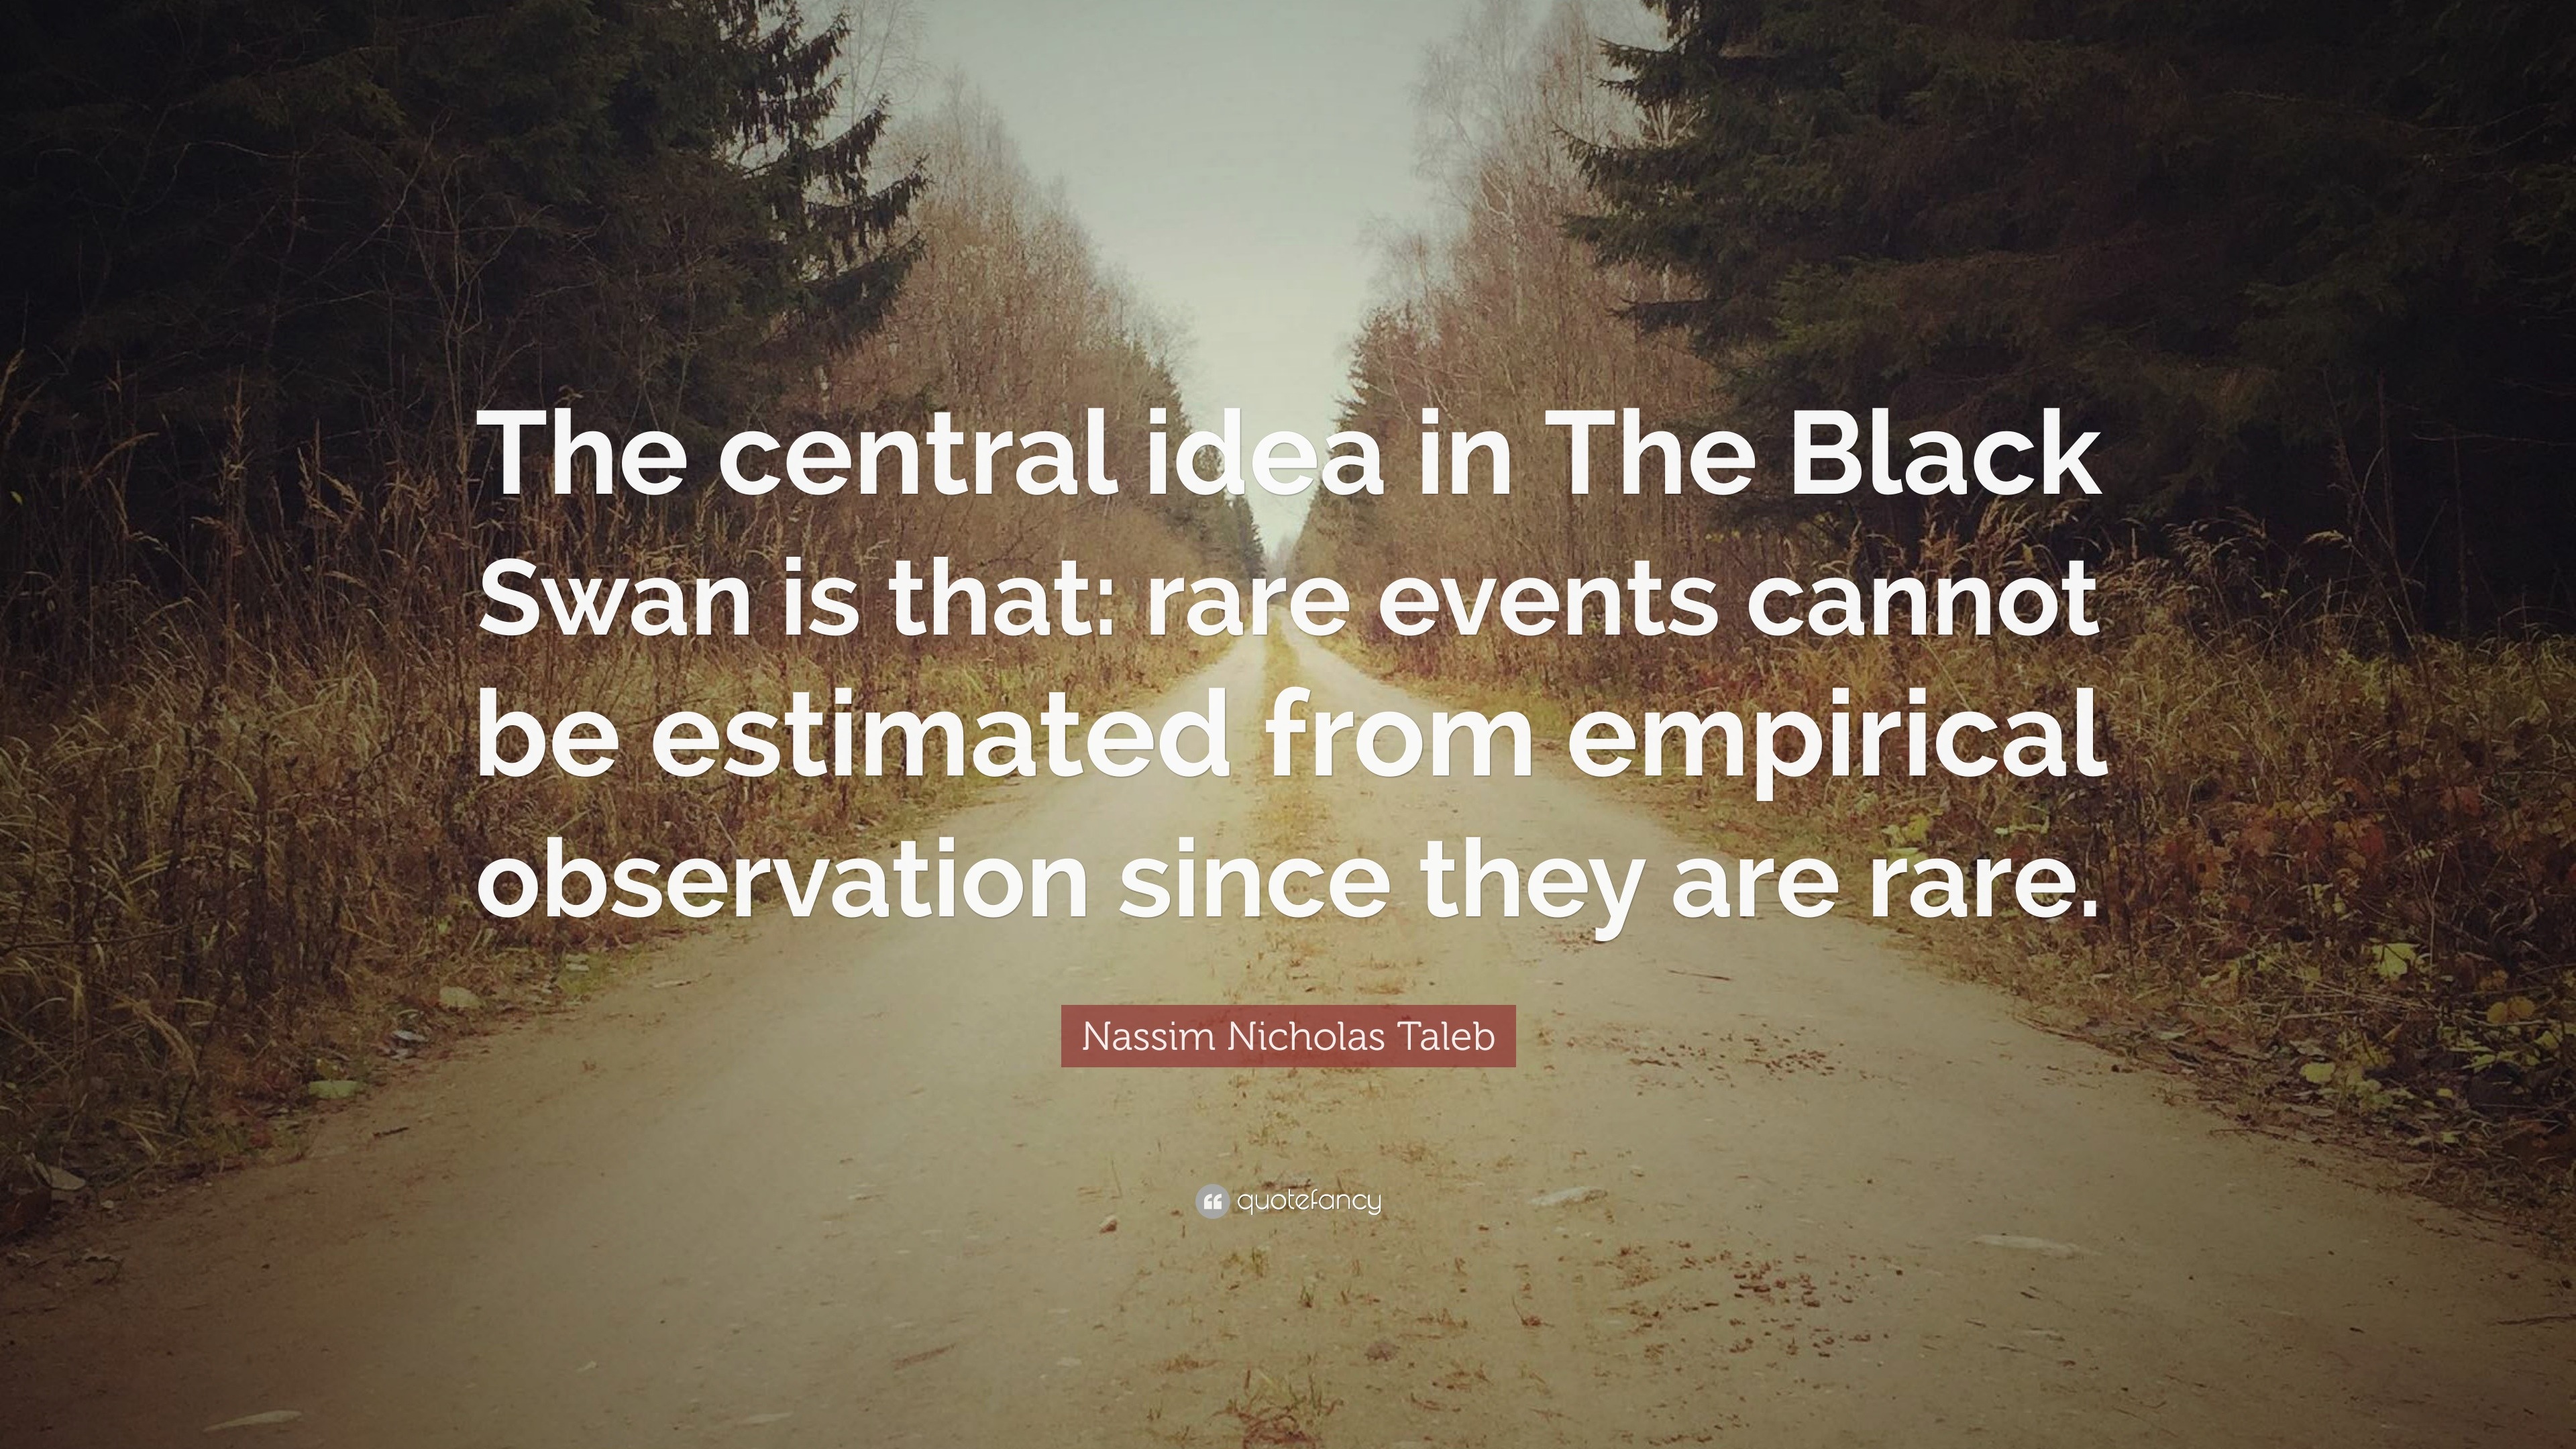 Nassim Nicholas Taleb Quote: “The central idea in The Black Swan is that: rare events cannot be estimated empirical observation since they are ra...”